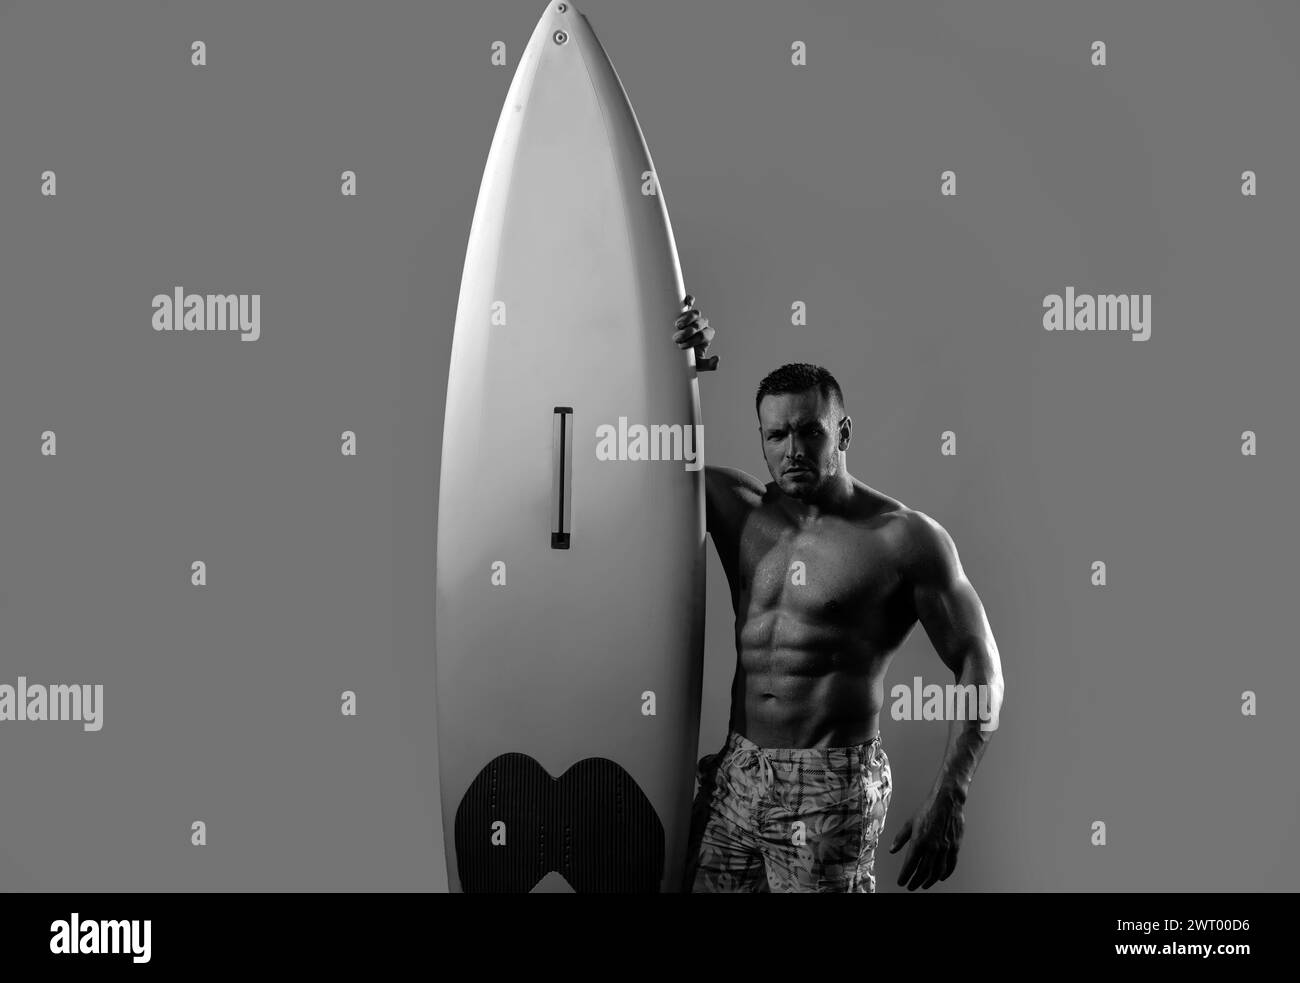 Handsome serfer man with serf board. Male fit with athletic body. Surfboard man with serf board. Surfer with a surfboard isolated on blue. Stock Photo